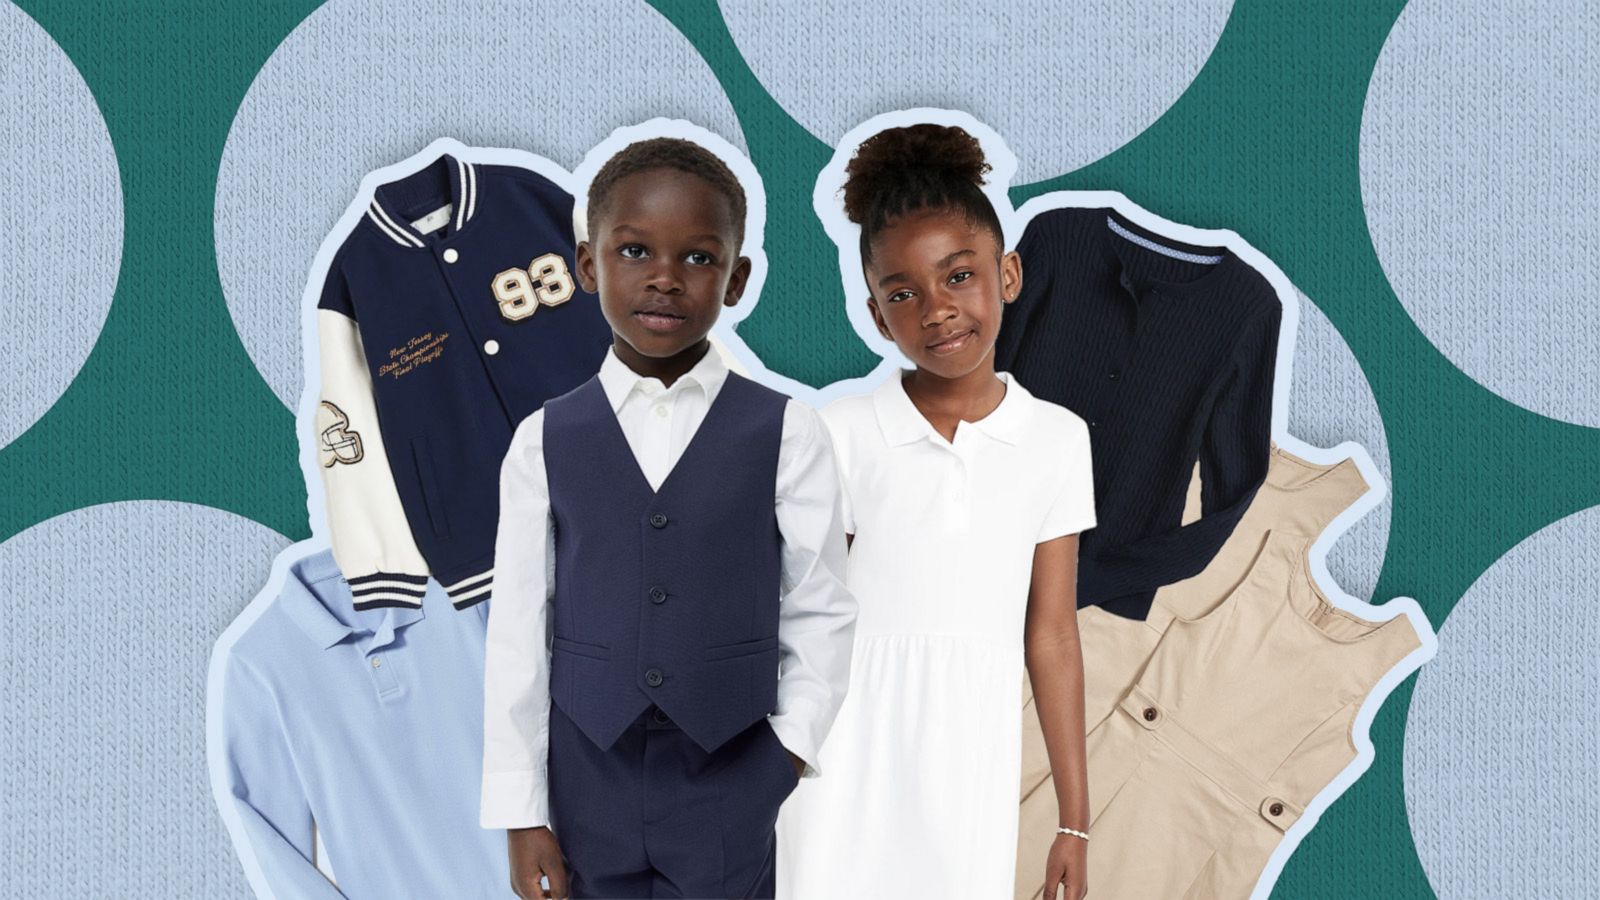 Shop back-to-school uniforms from Old Navy, Gap and more - Good Morning  America